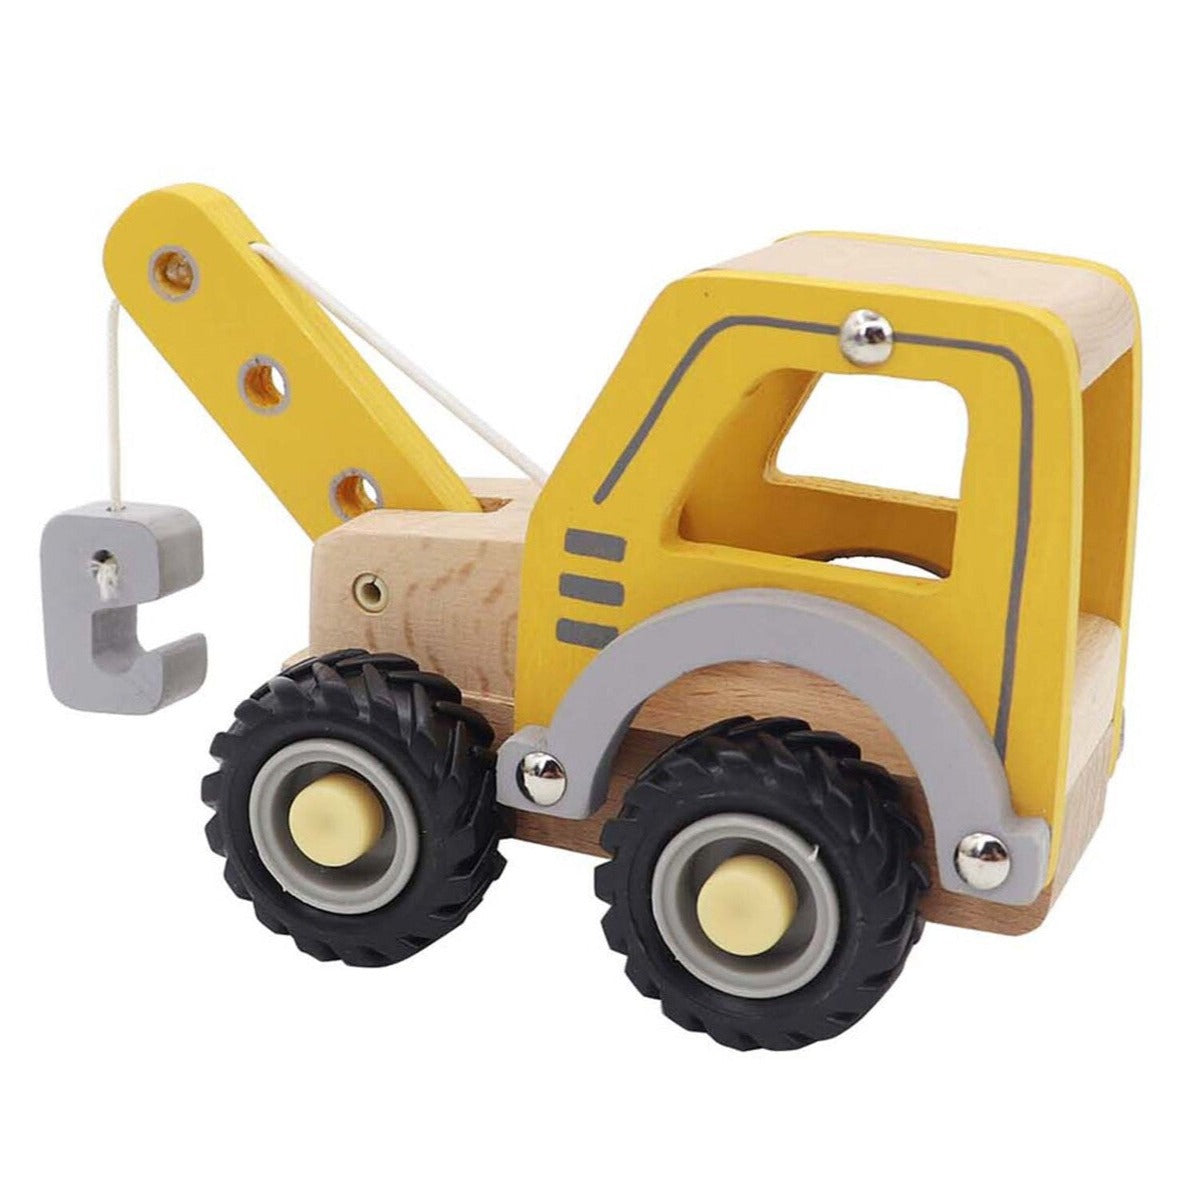 Wooden toy crane - angus and dudley